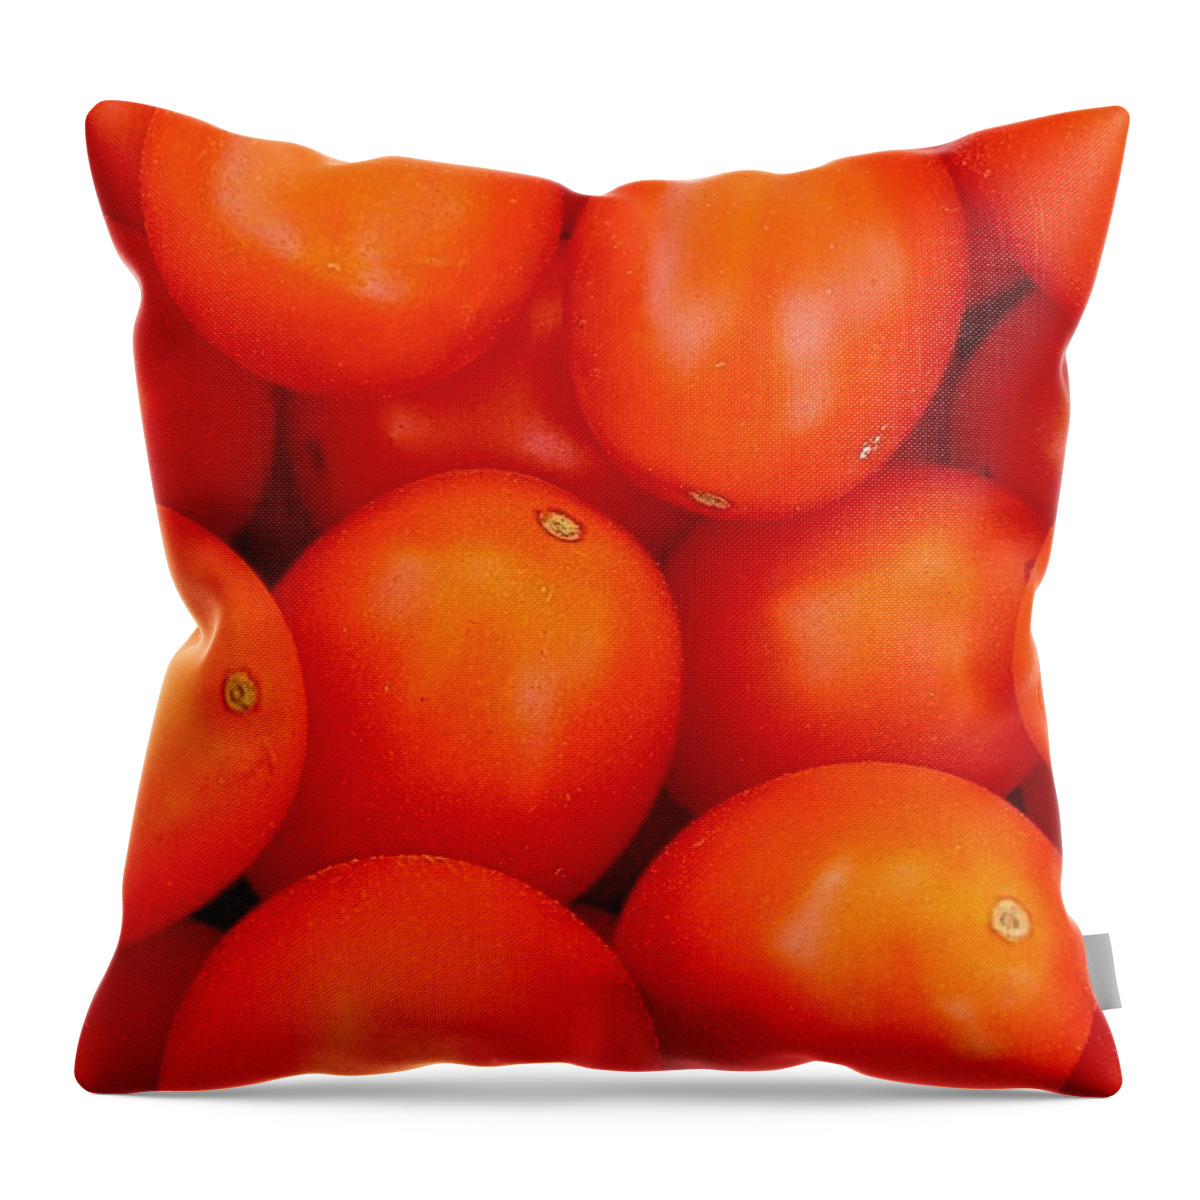 Tomato Harvest Throw Pillow featuring the photograph Summer Fun by Cynthia Wallentine